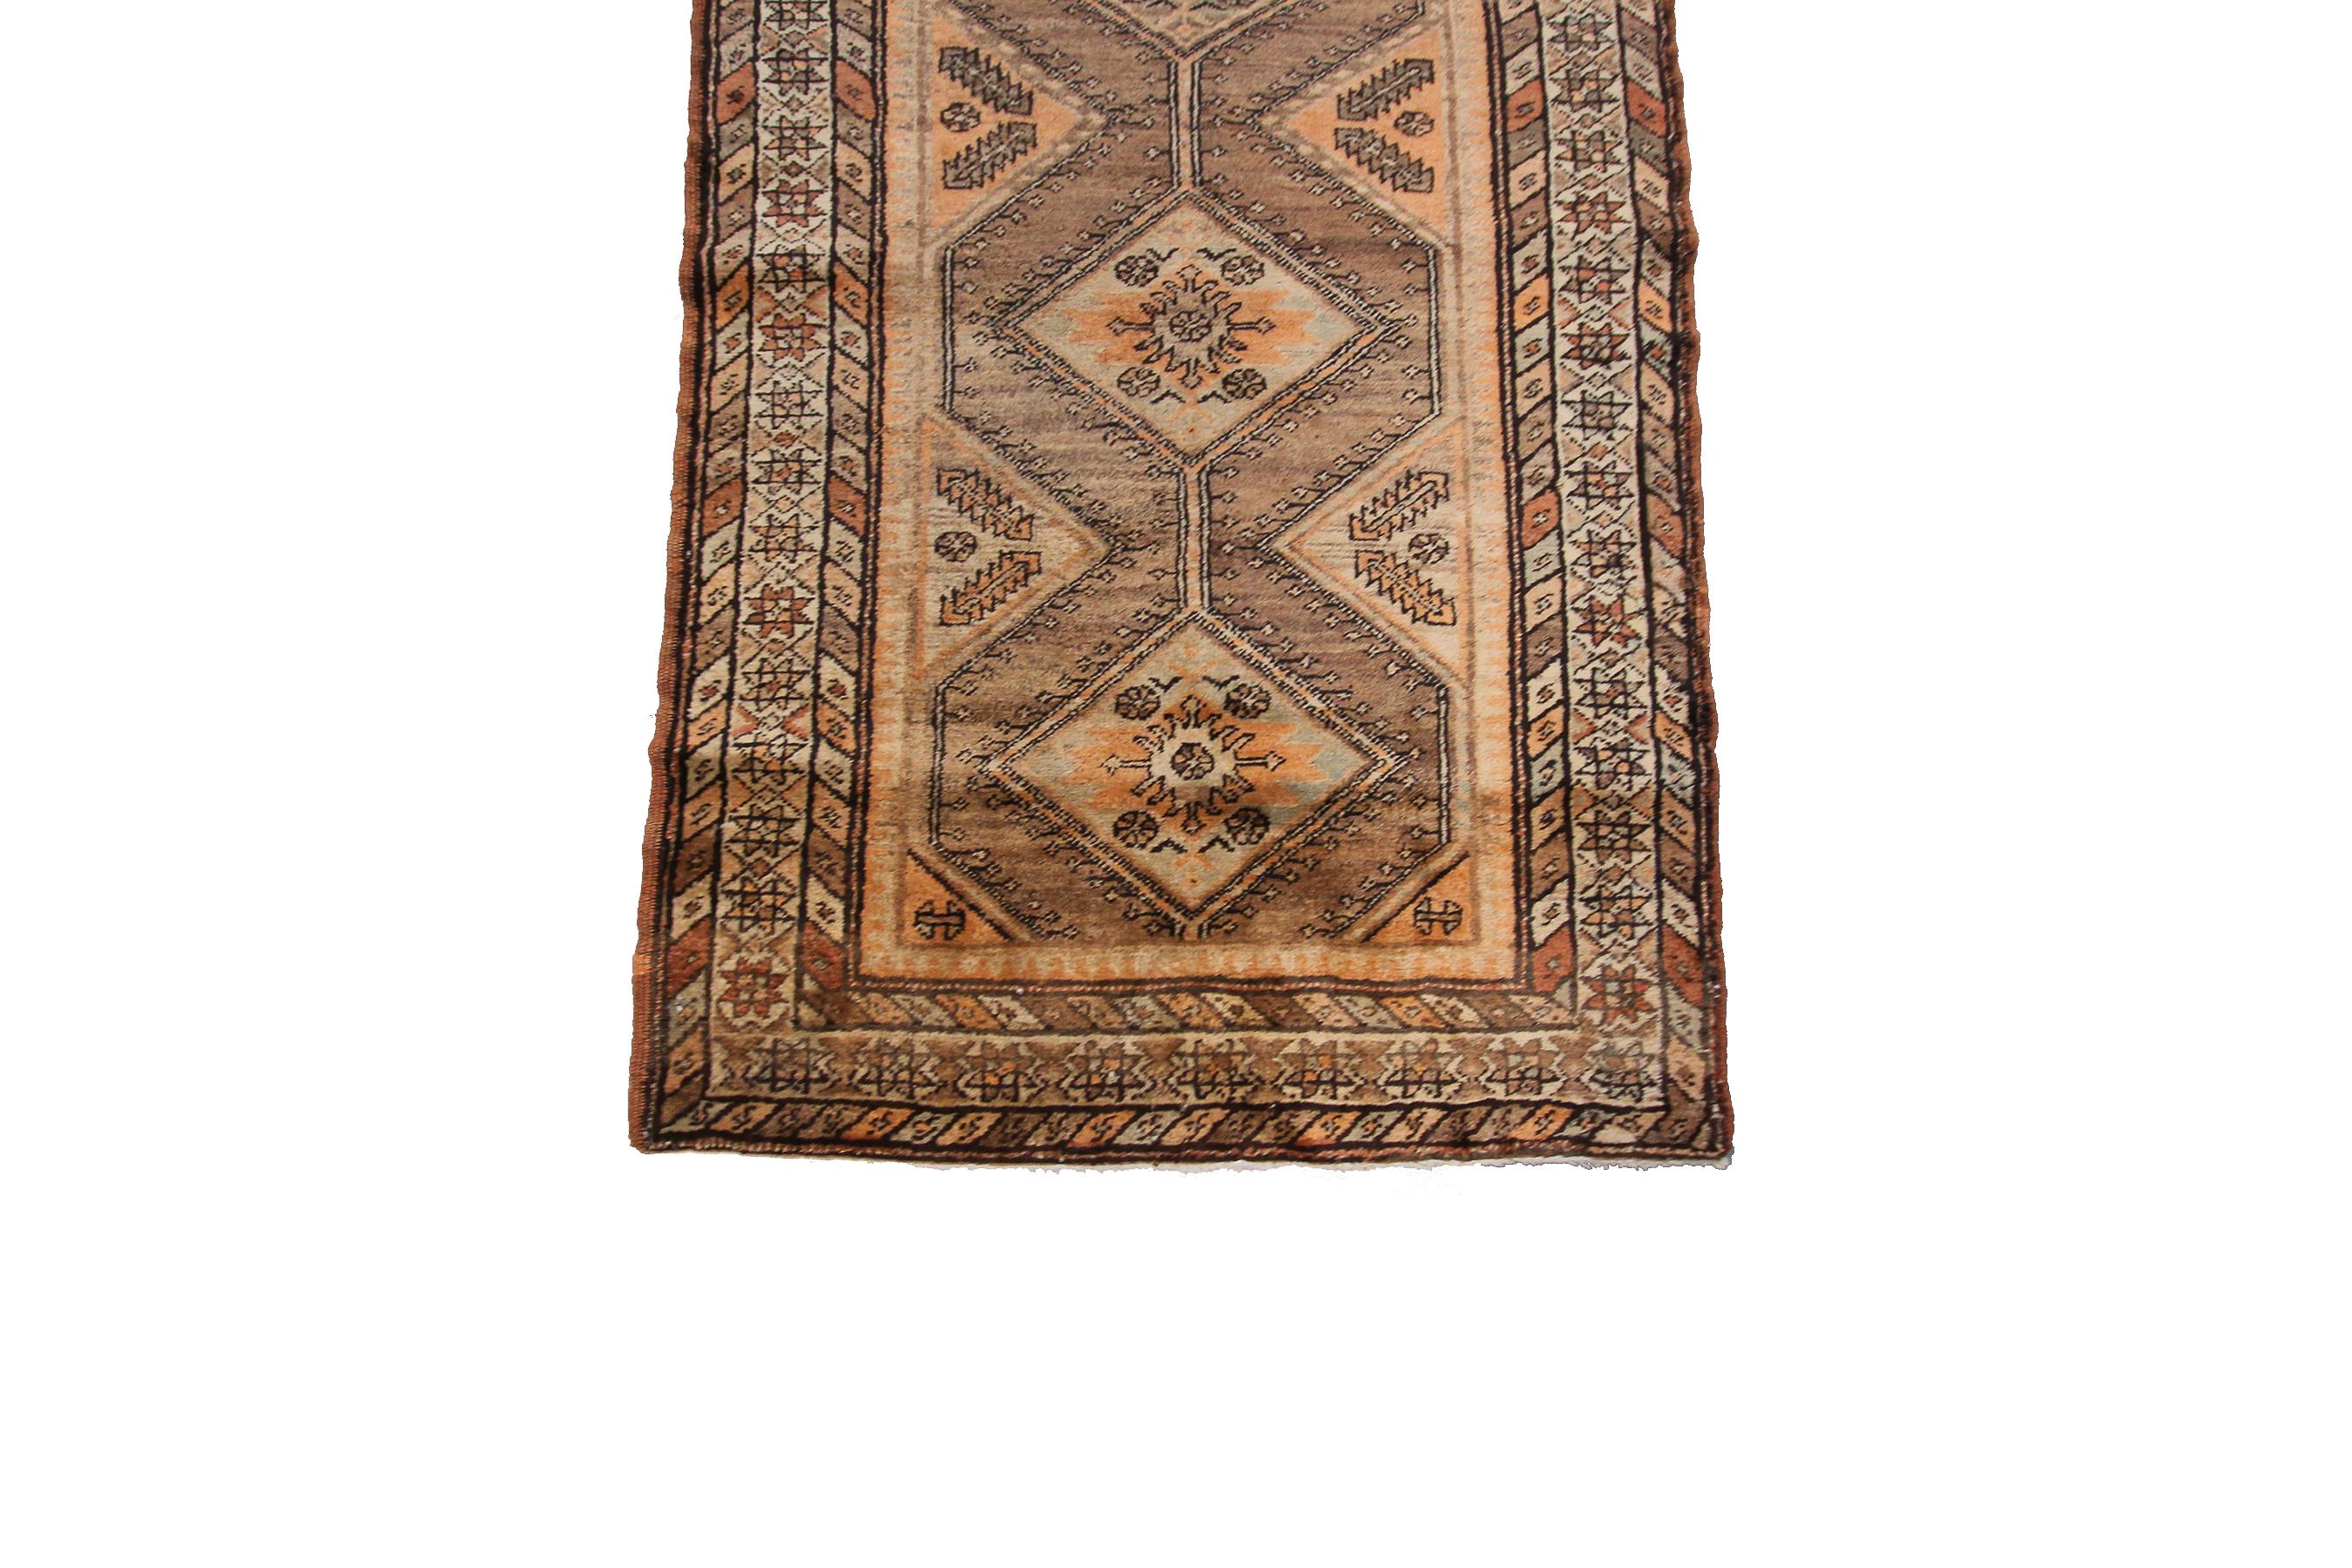 Early 20th Century Antique Persian Rug Antique Persian Runner Sarab Runner 3x14 Wool Foundation For Sale